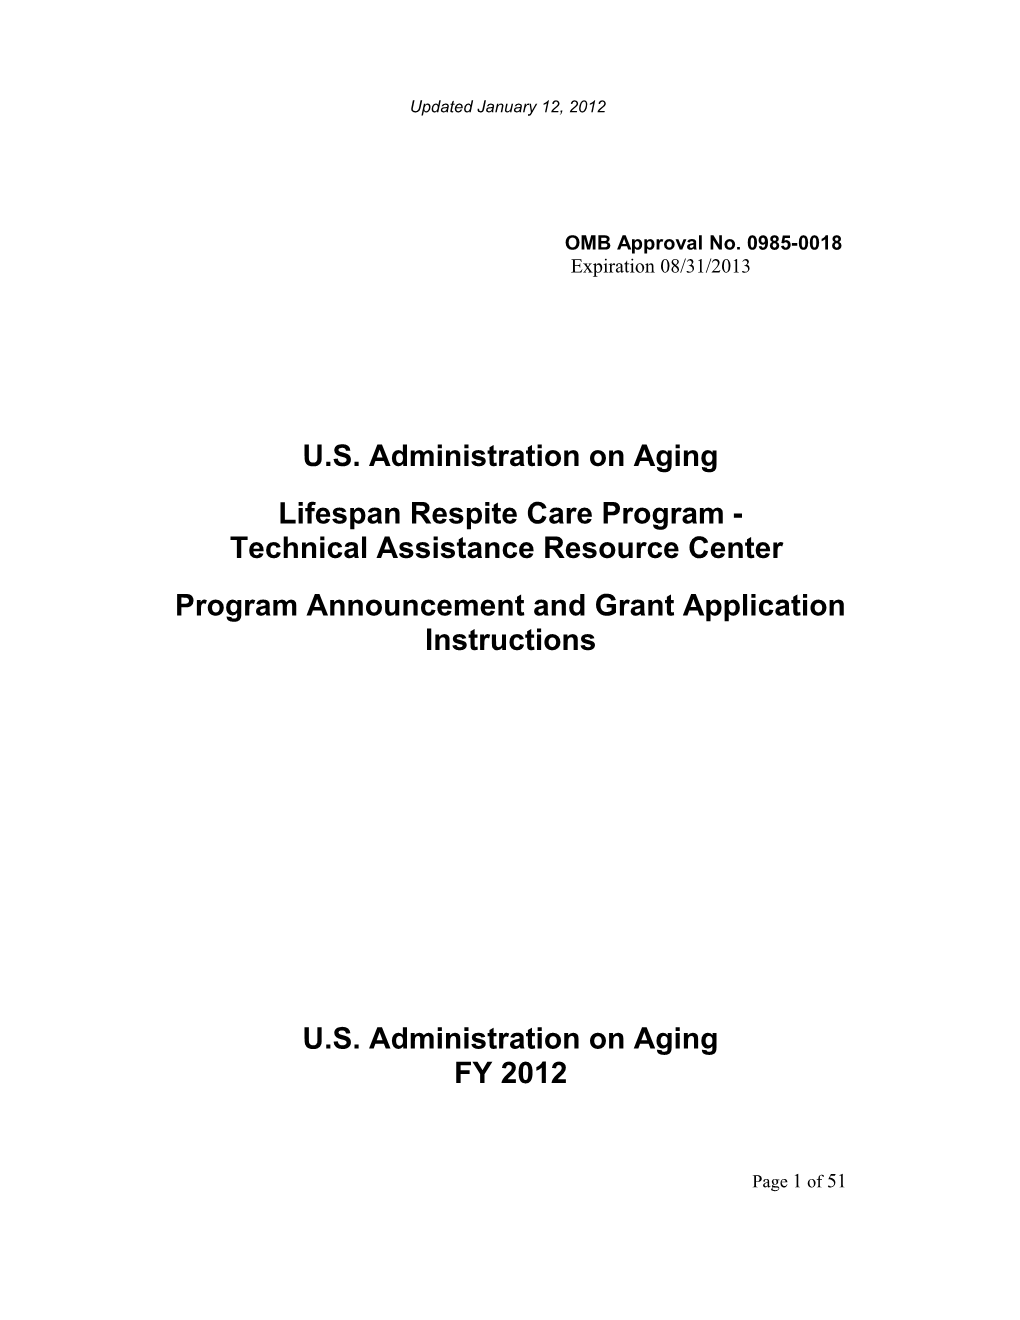 Fiscal Year 2012 Program Announcement and Grant Application Instructions